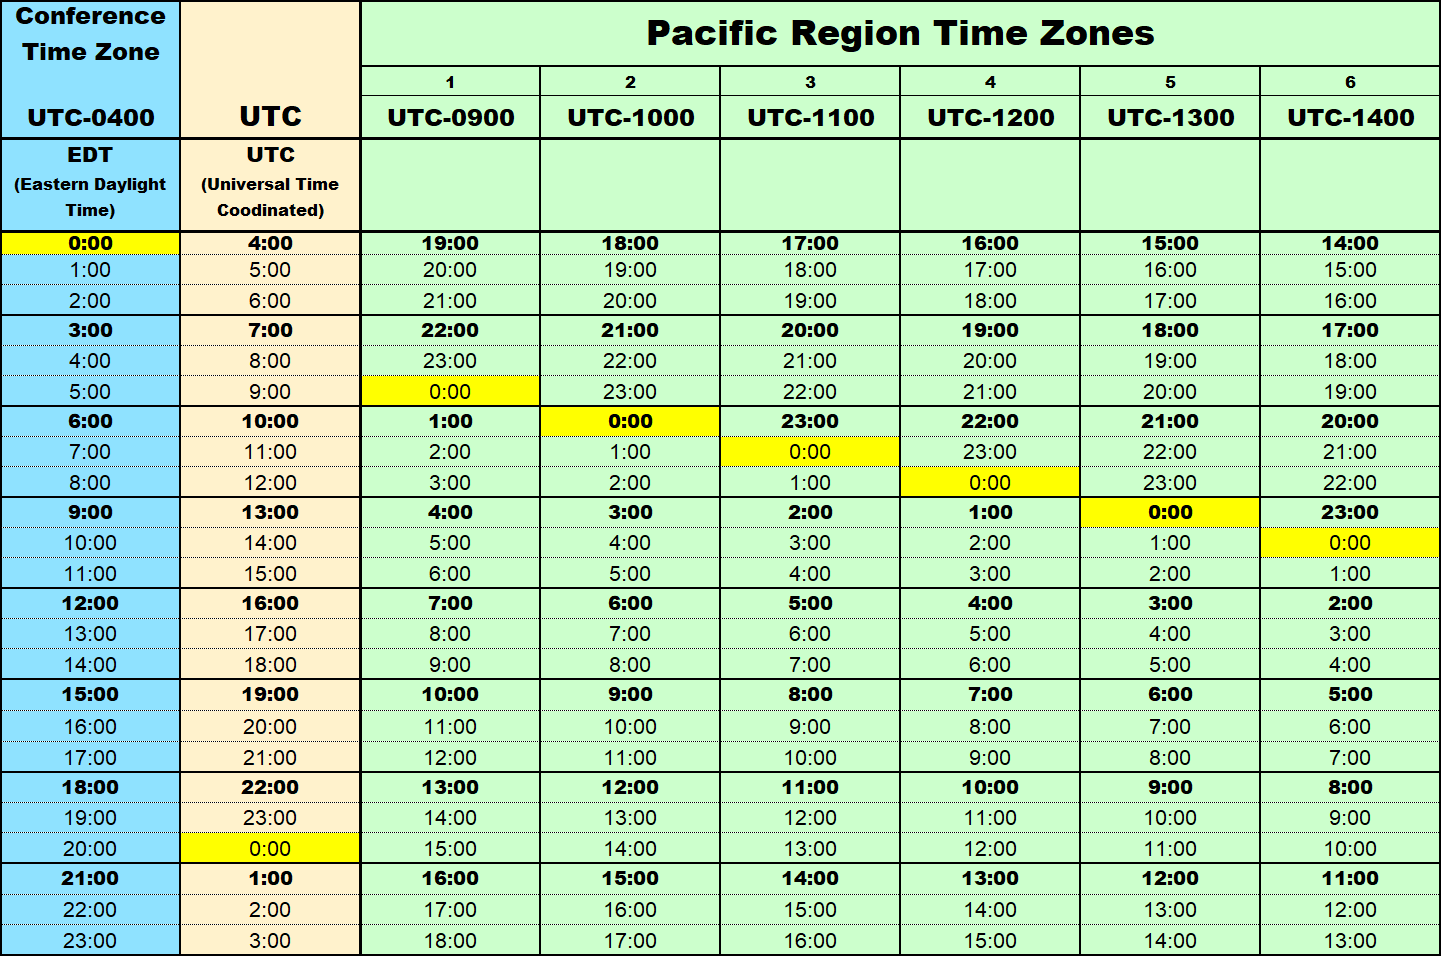 Conference Time Zones - Pacific Region